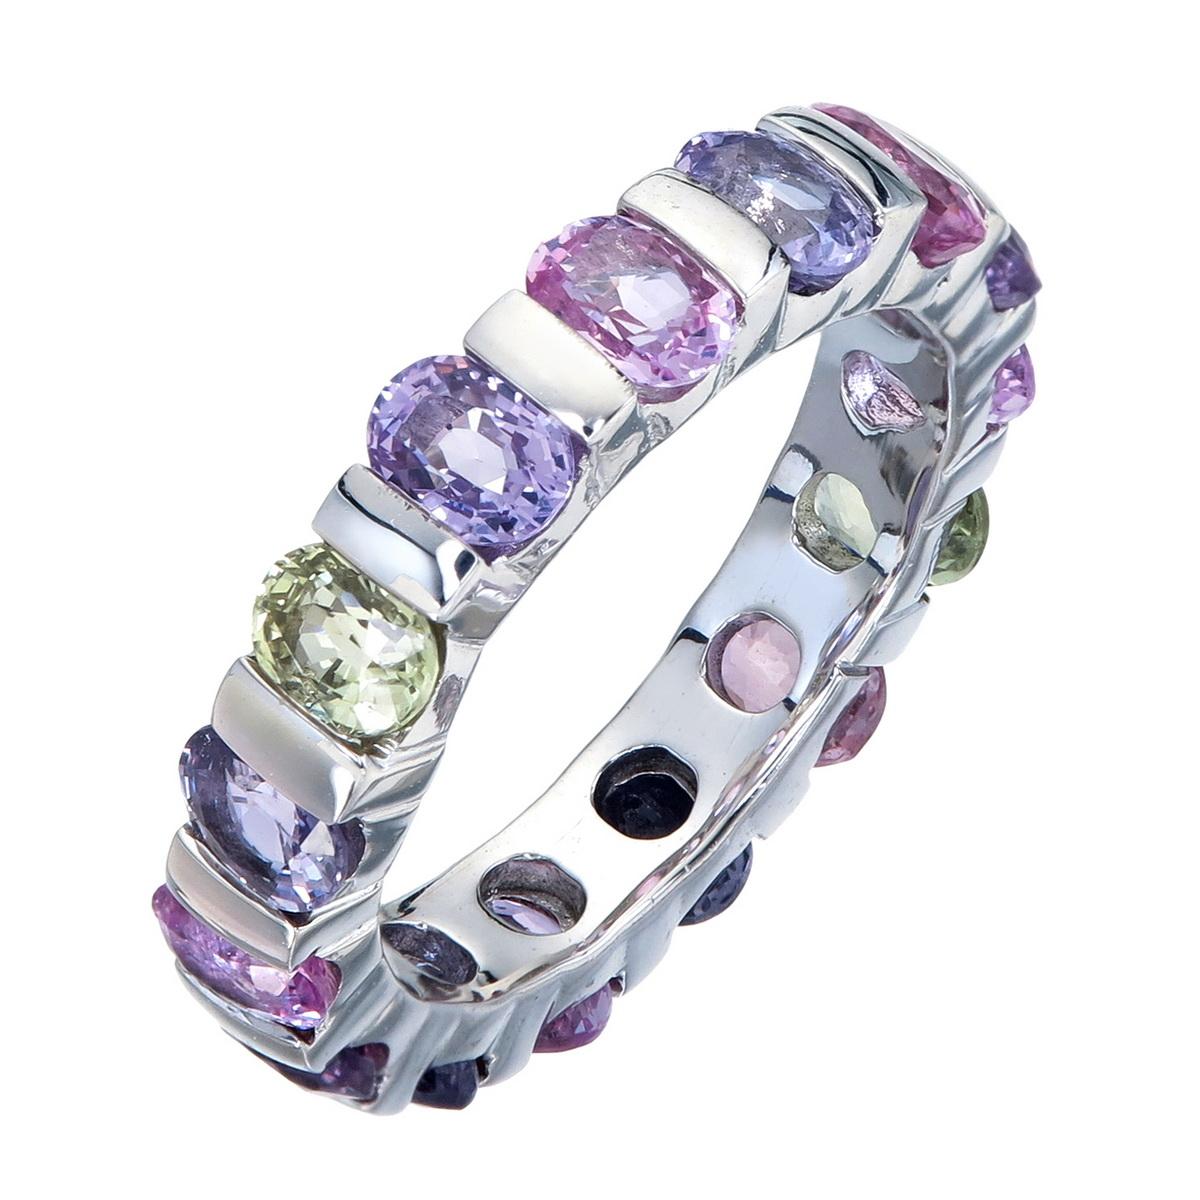 Orloff of Denmark; Fifteen Fancy Sapphire Eternity Band set in 925 Sterling Silver.

Ranging from pink and purple to even light green, these fancy sapphires come together to form a gorgeous band of eternal color and sparkle.
Elegantly flush-set in